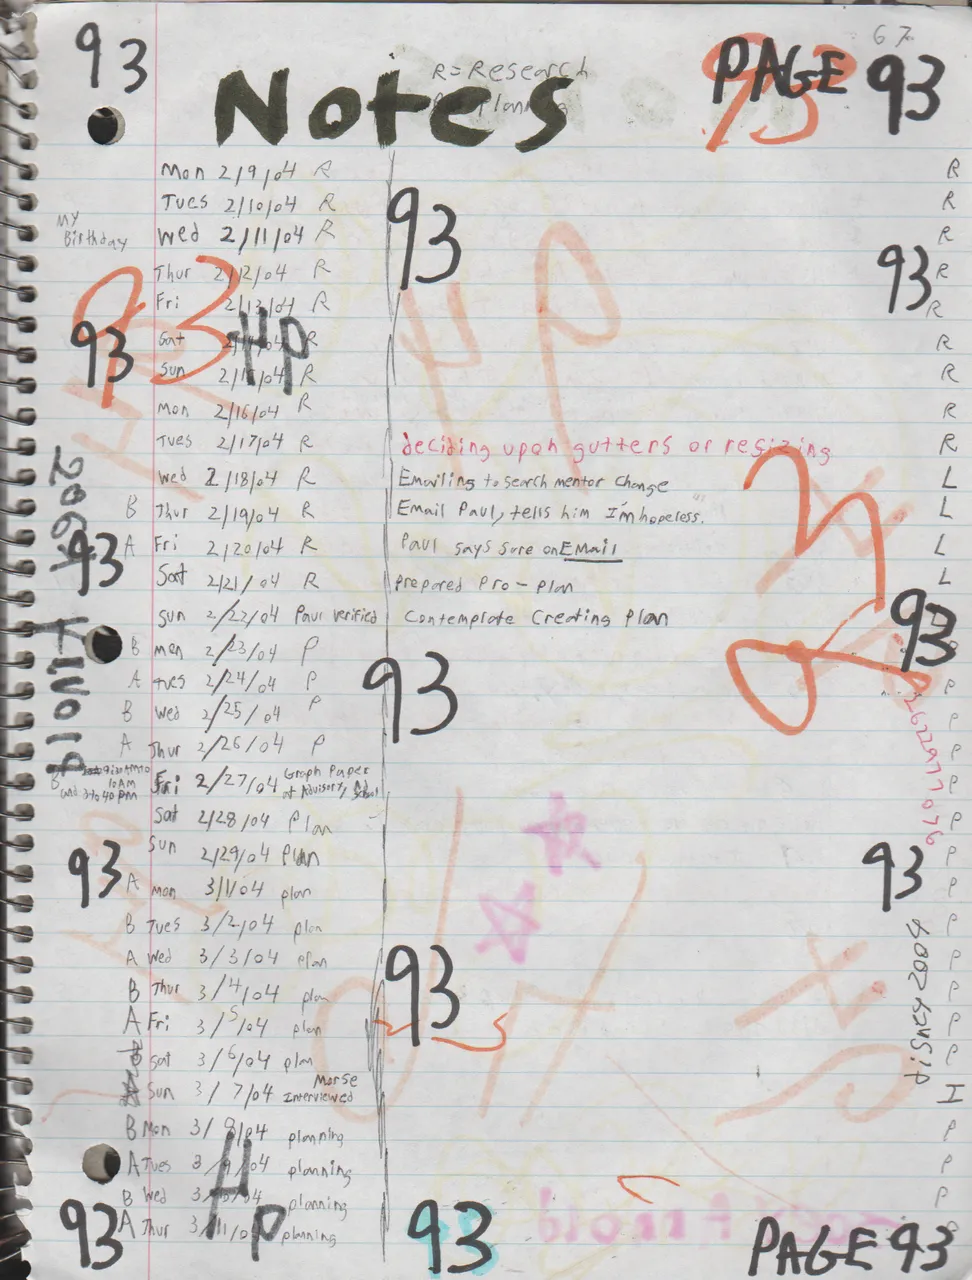 2004-01-29 - Thursday - Carpetball FGHS Senior Project Journal, Joey Arnold, Part 02, 96pages numbered, Notebook-91.png